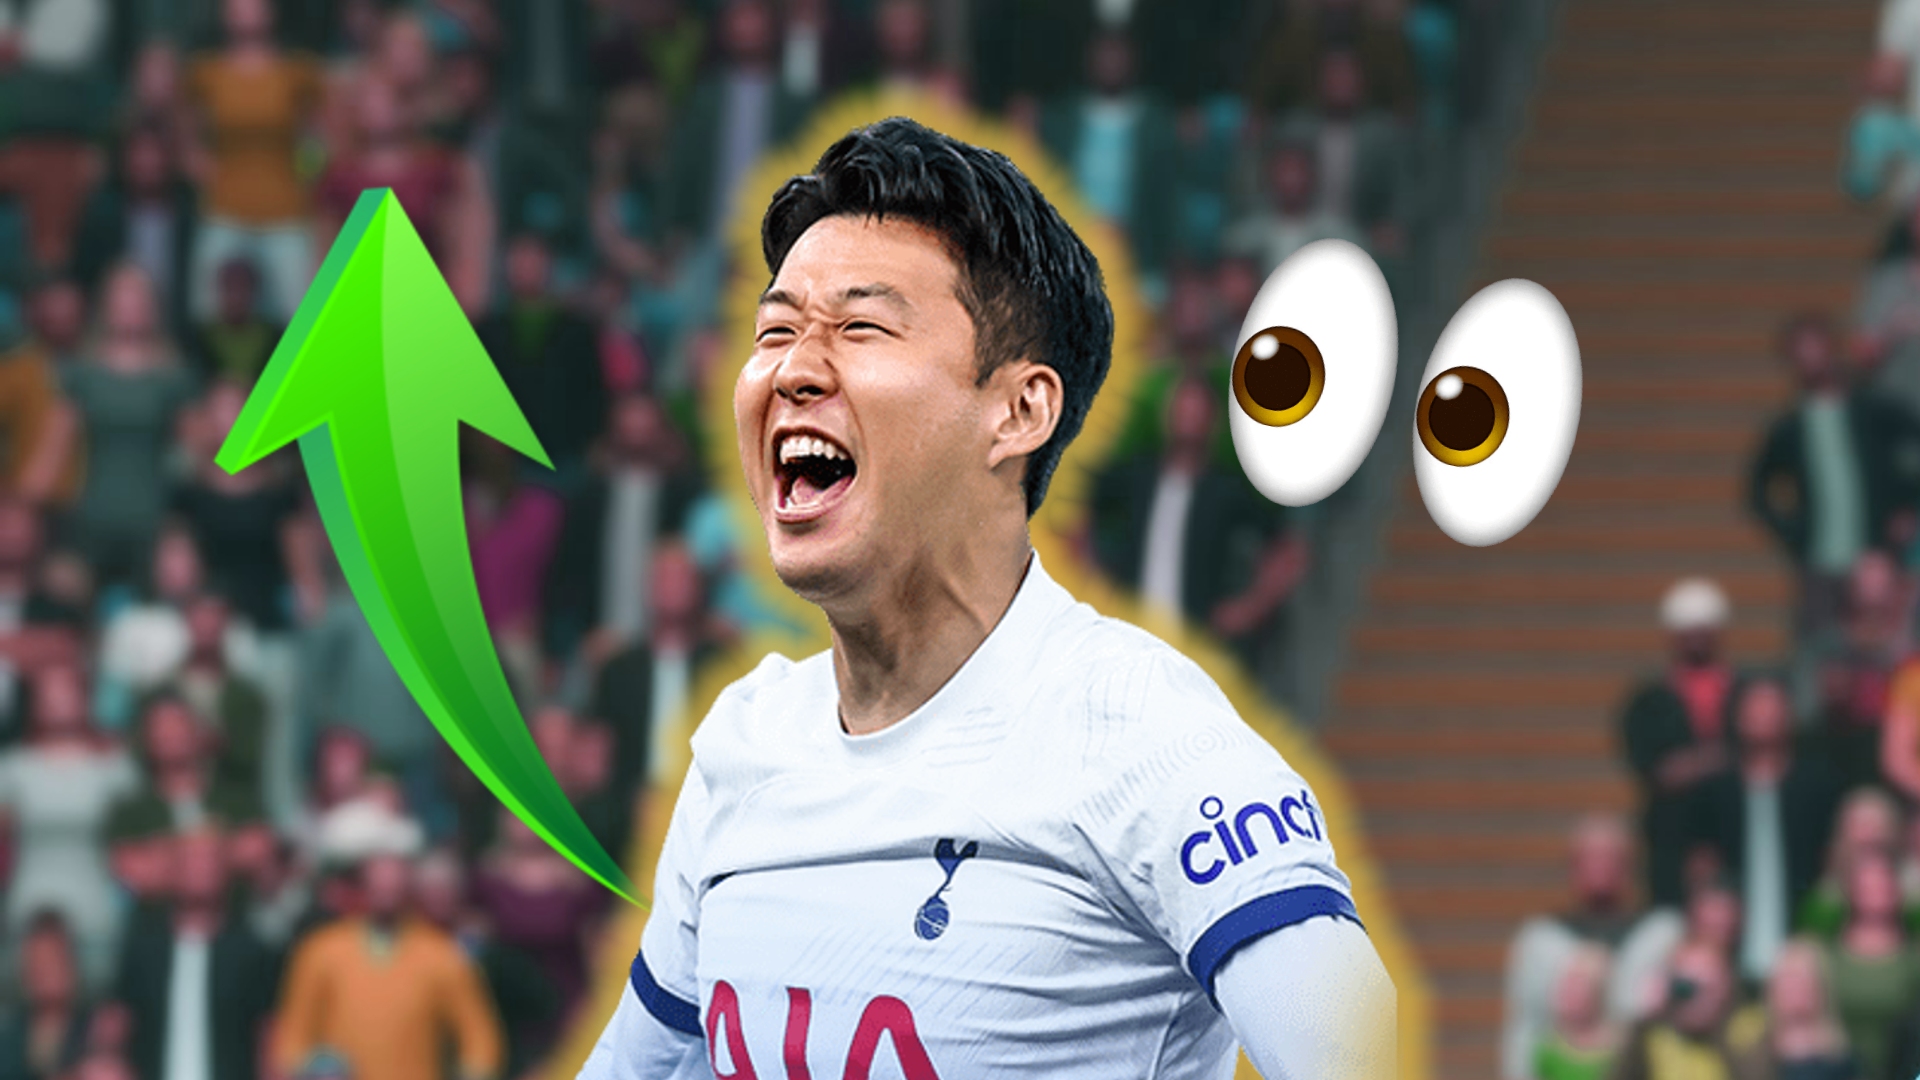 You can get 4 Gold Rare FC 24 players for free right now, here's how